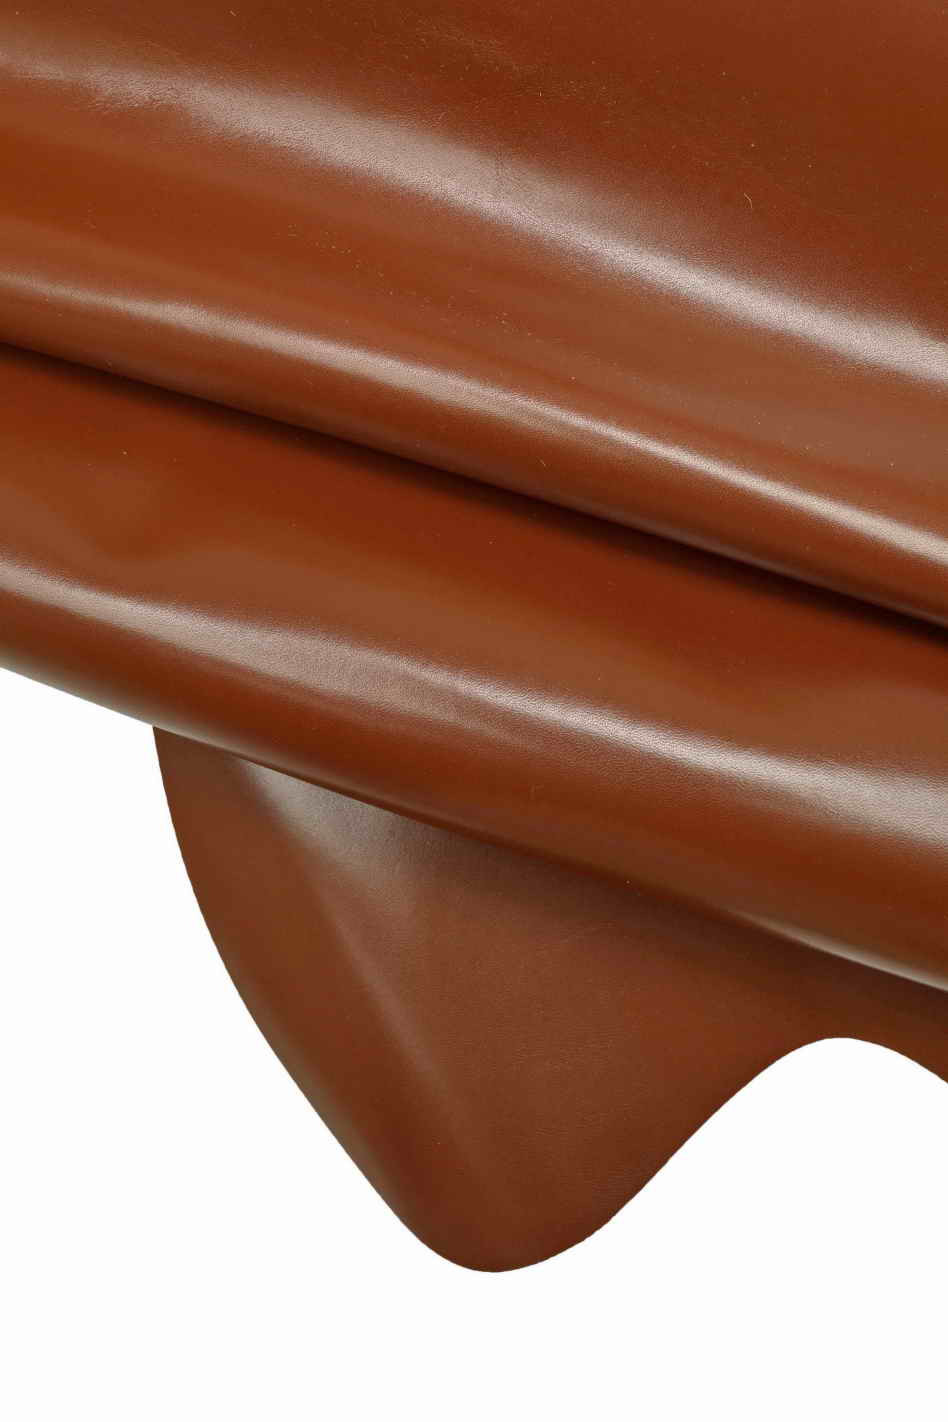 Hair-on Cowhide Leather - Its Qualities and When To Use It